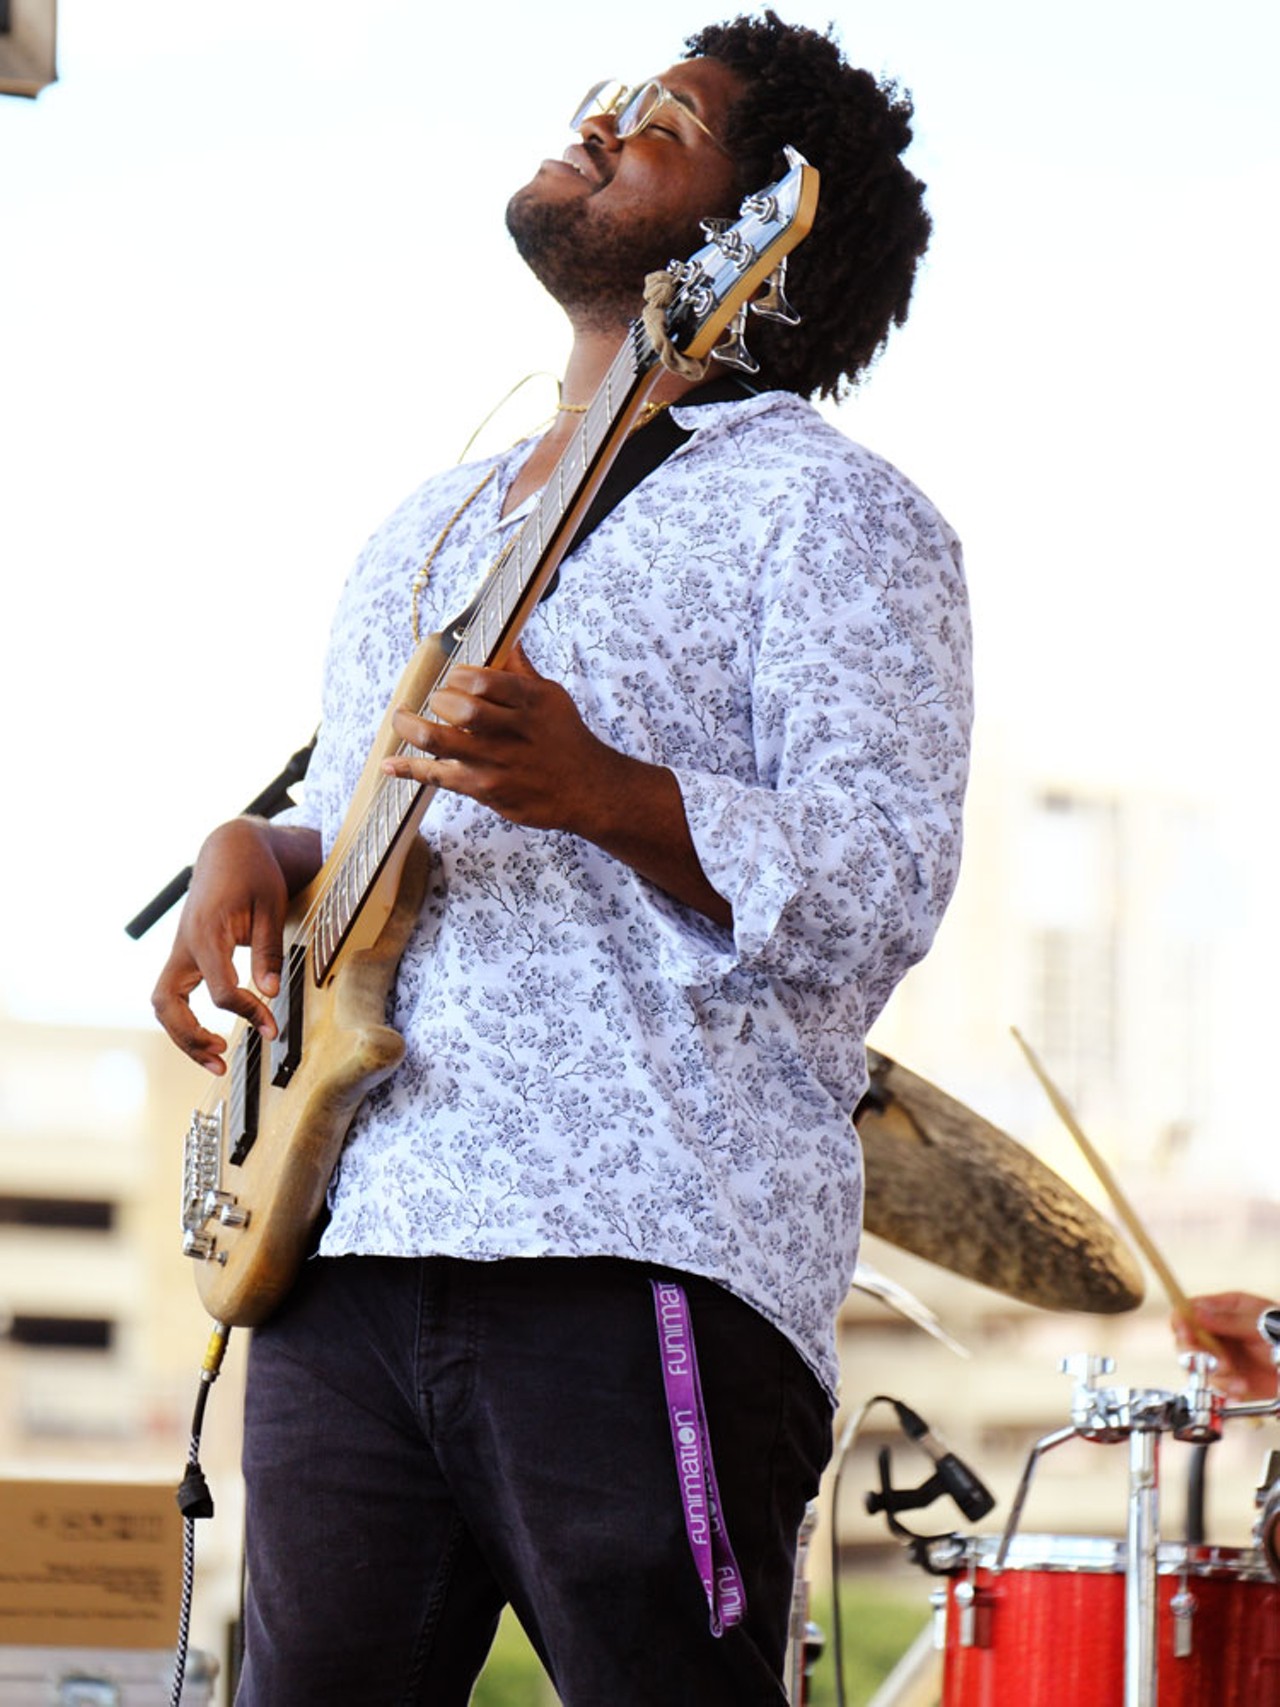 All the music and fun we saw at San Antonio's Jazz'SAlive festival